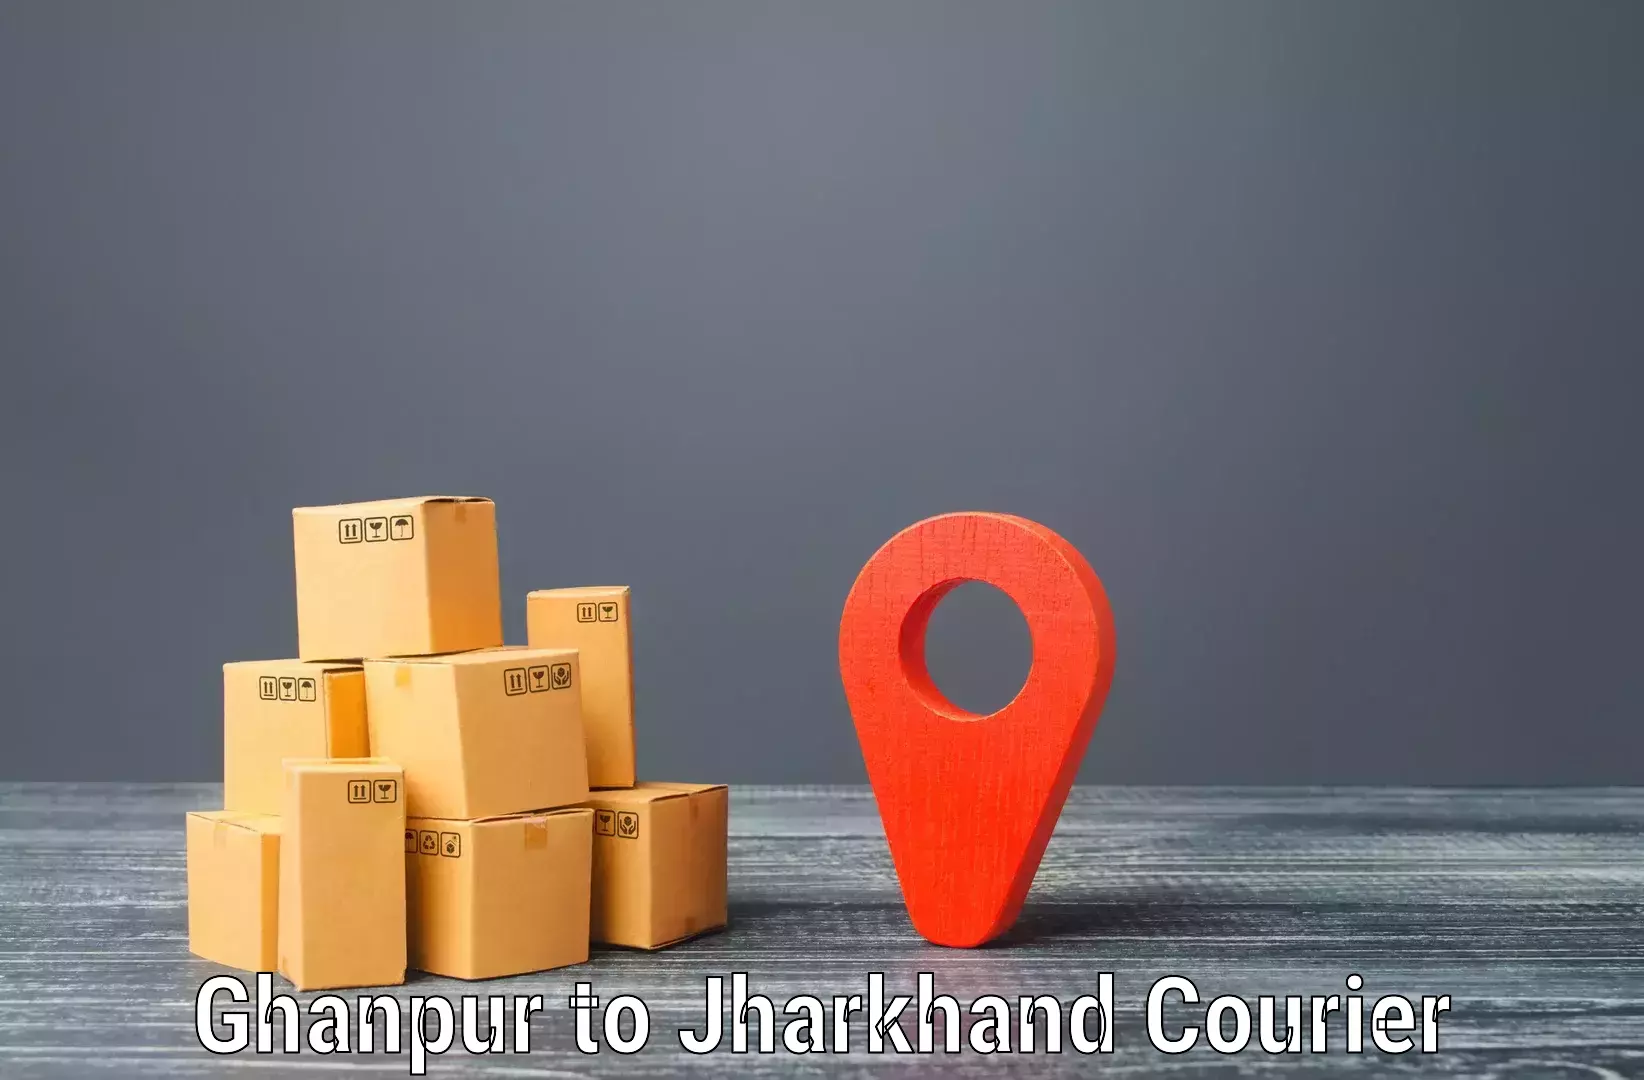 Efficient shipping platforms Ghanpur to Ranchi